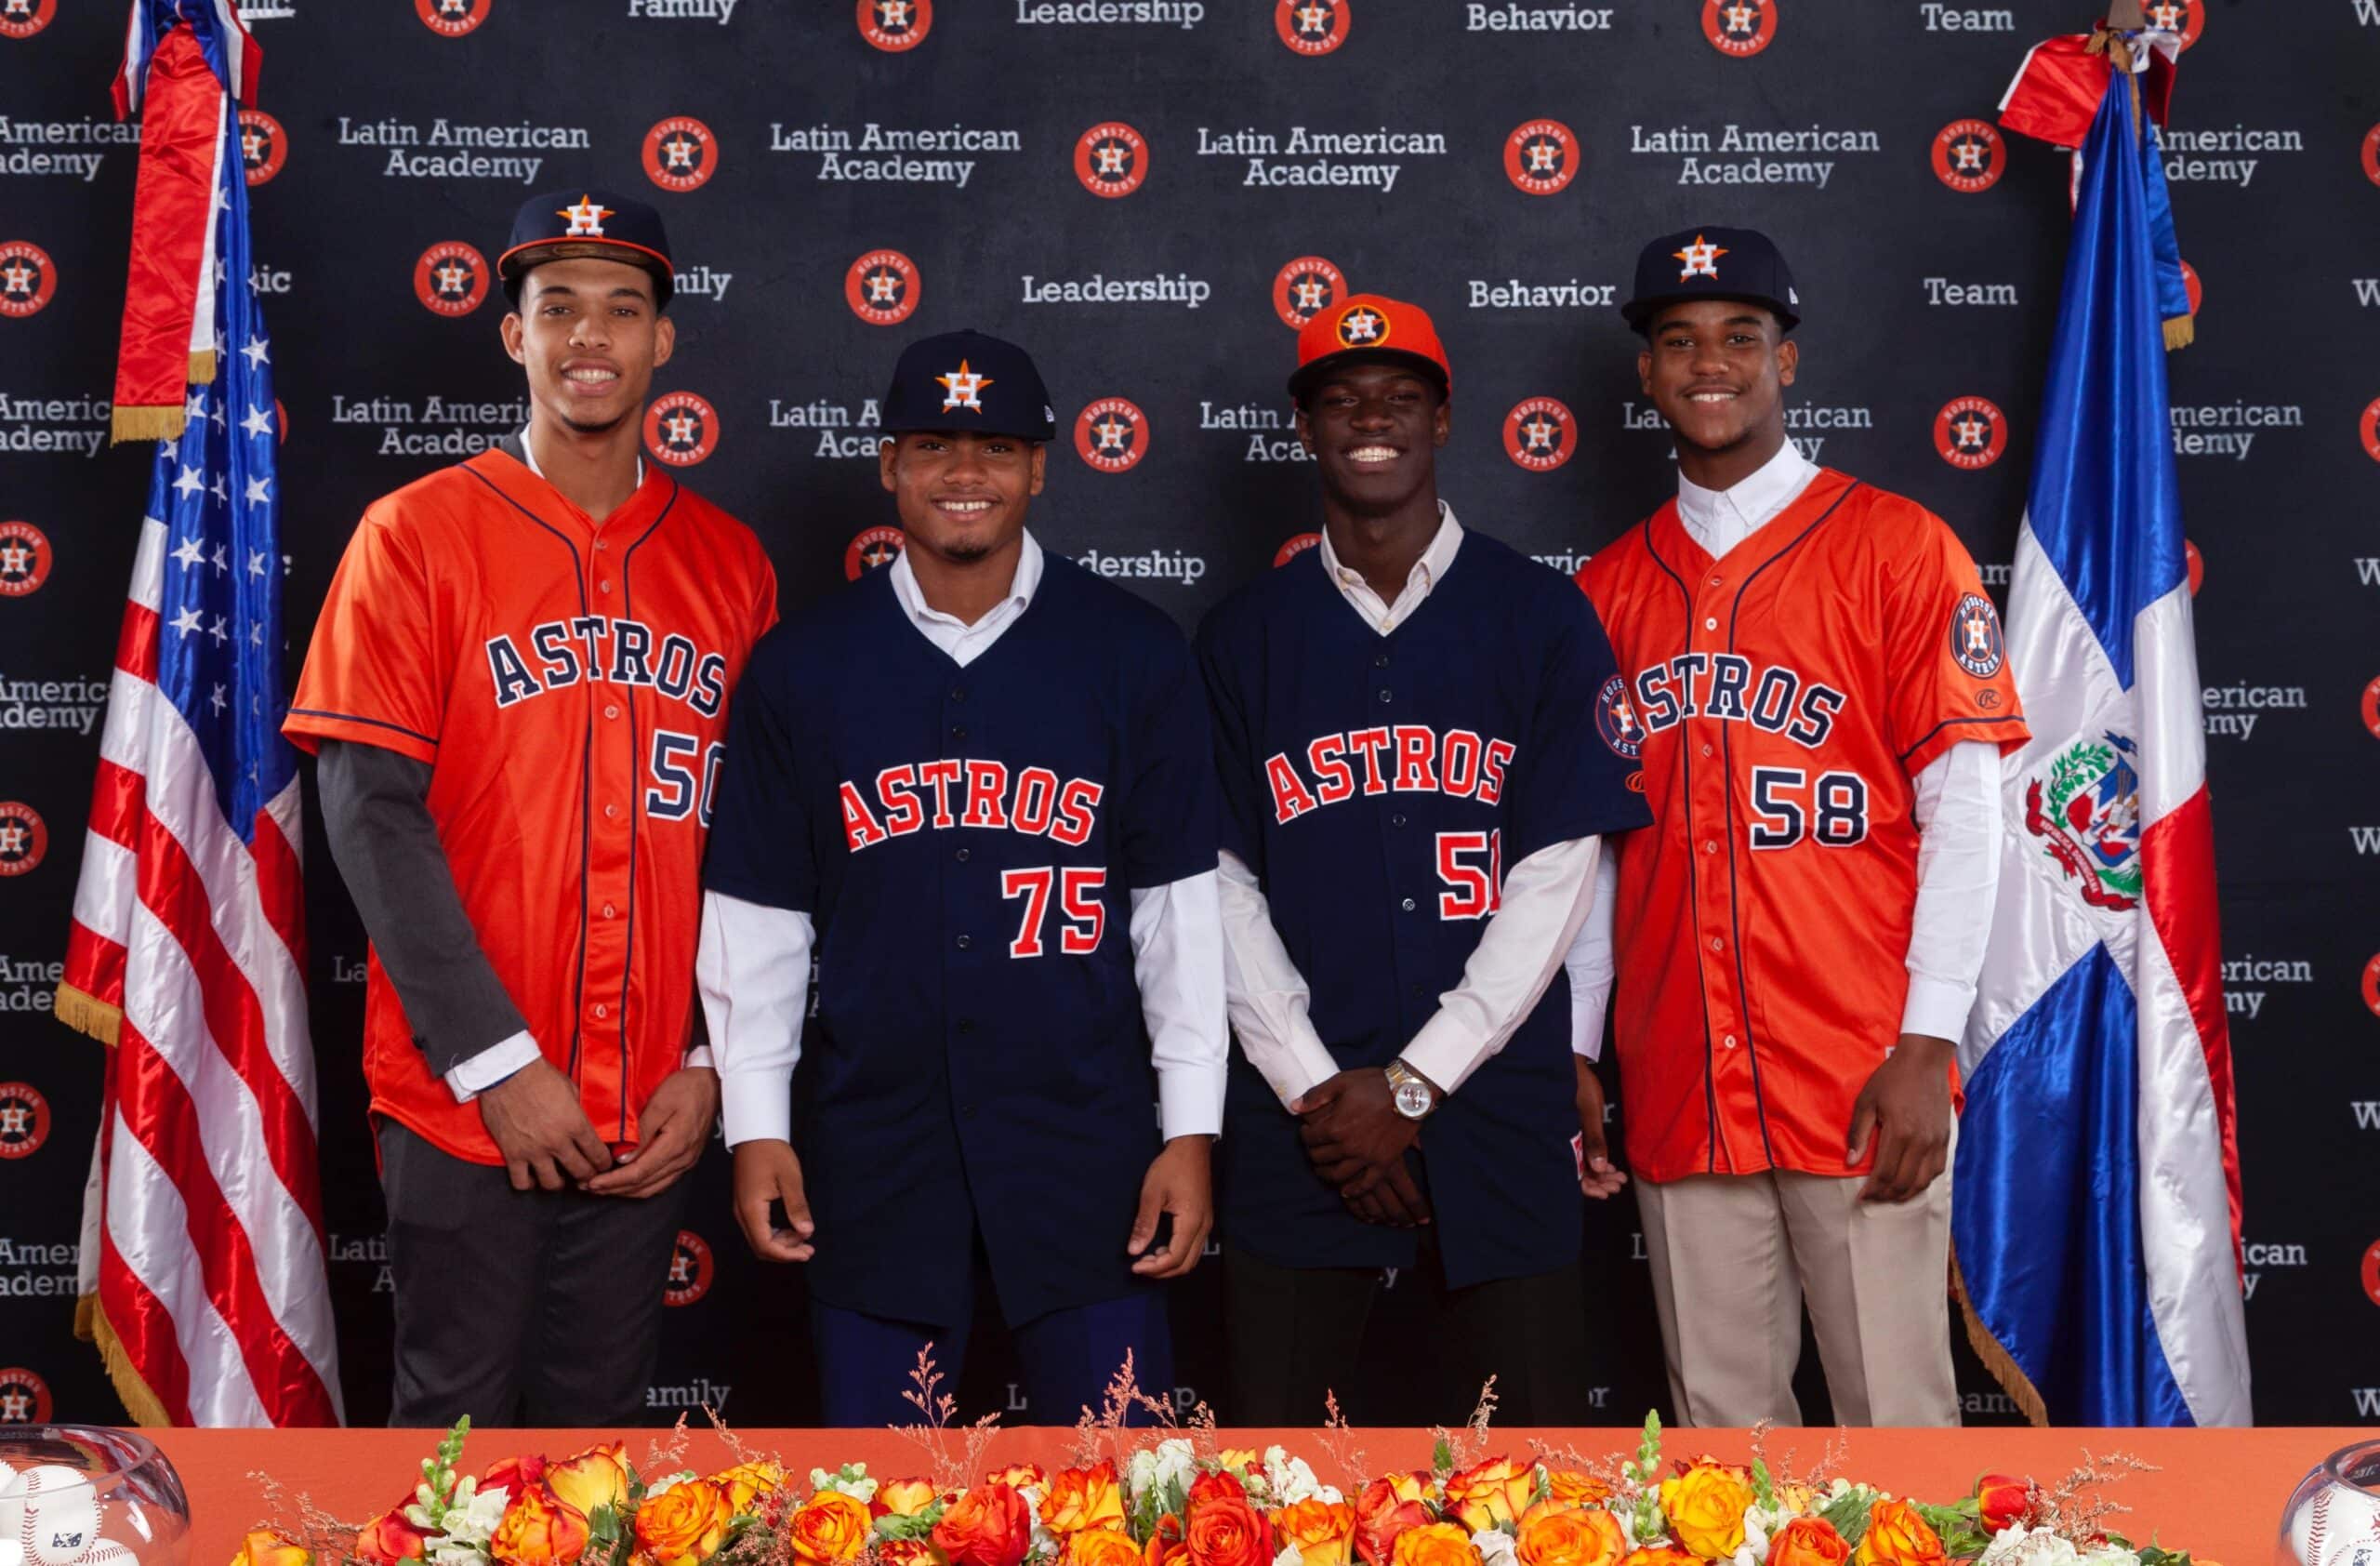 With new uniforms, Astros go back to the future